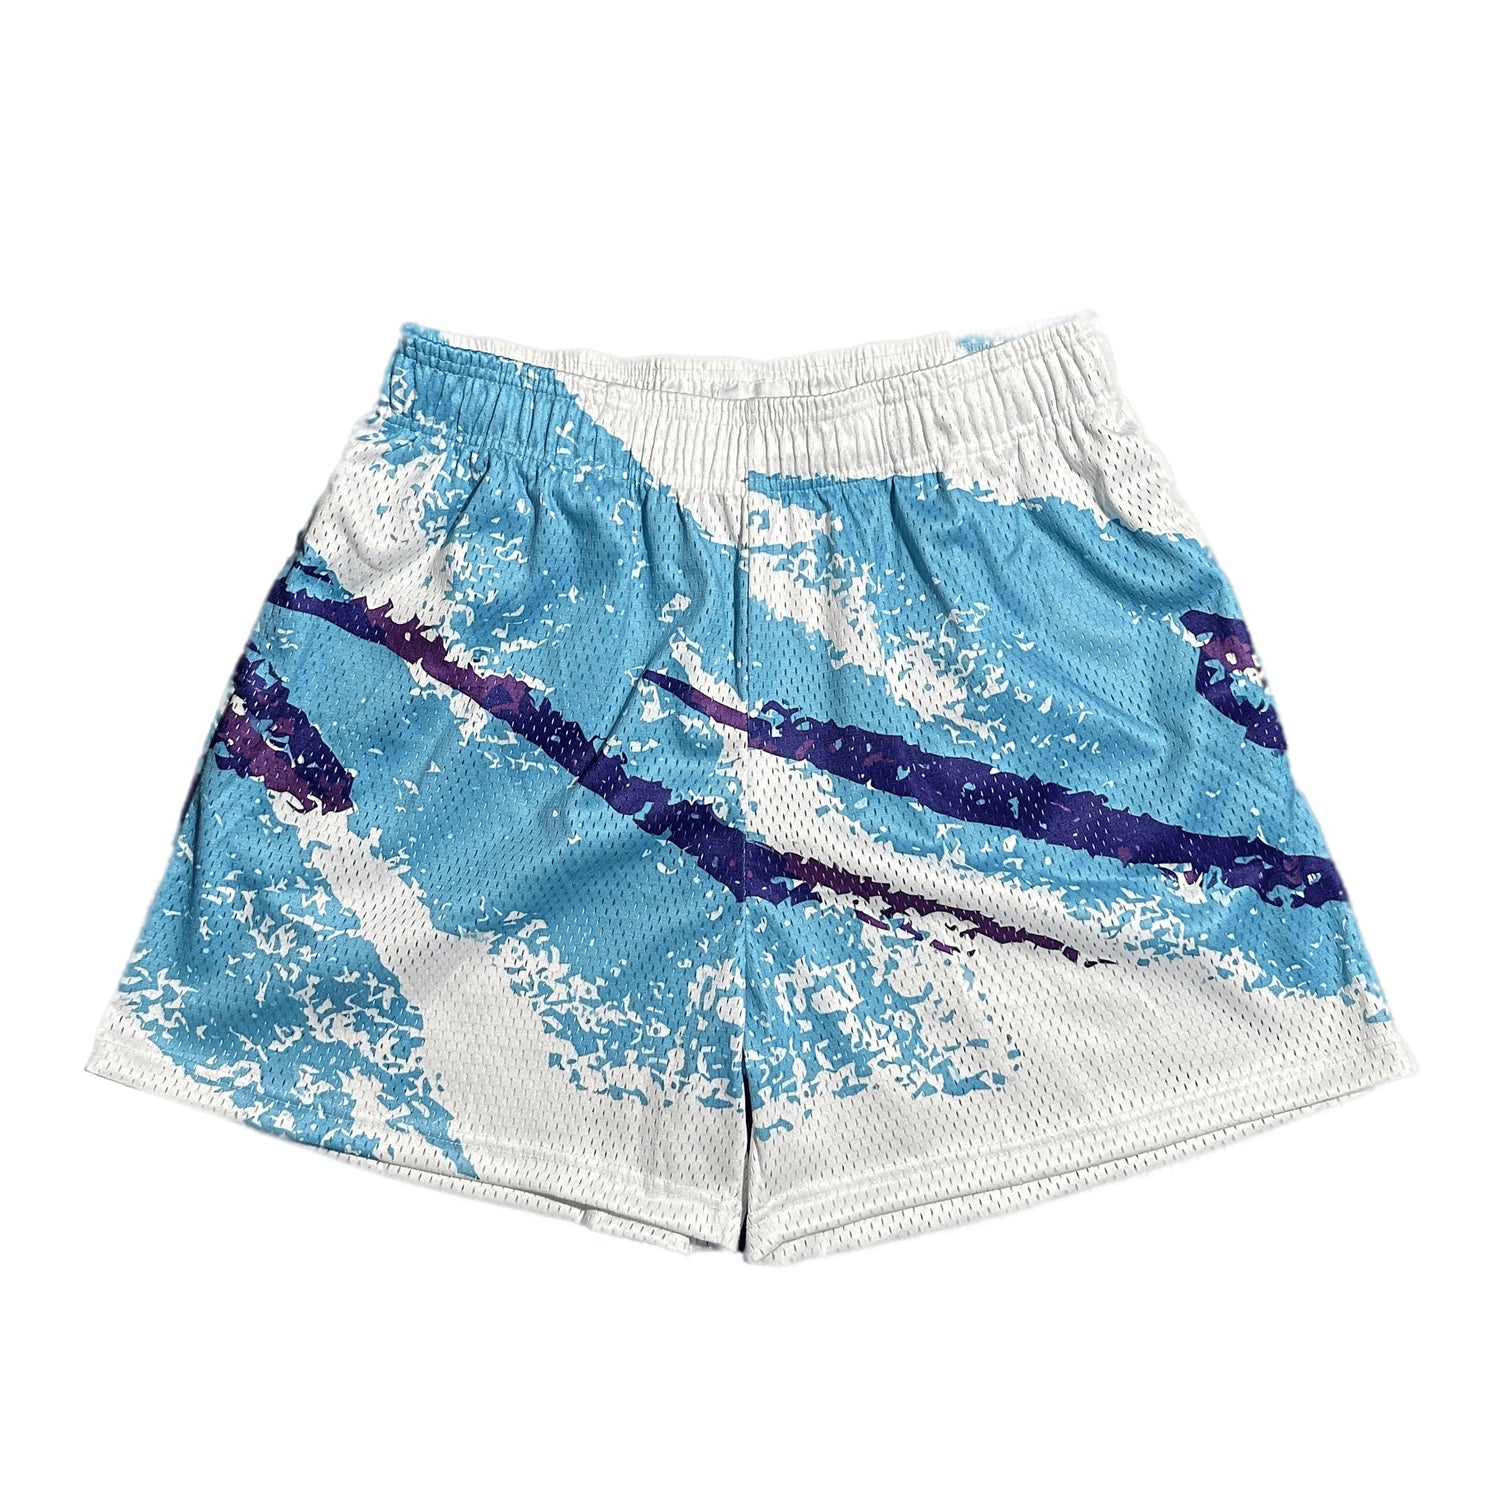 NSPR.™ Mesh Shorts / 90s Solo Cup – NSPR.LV